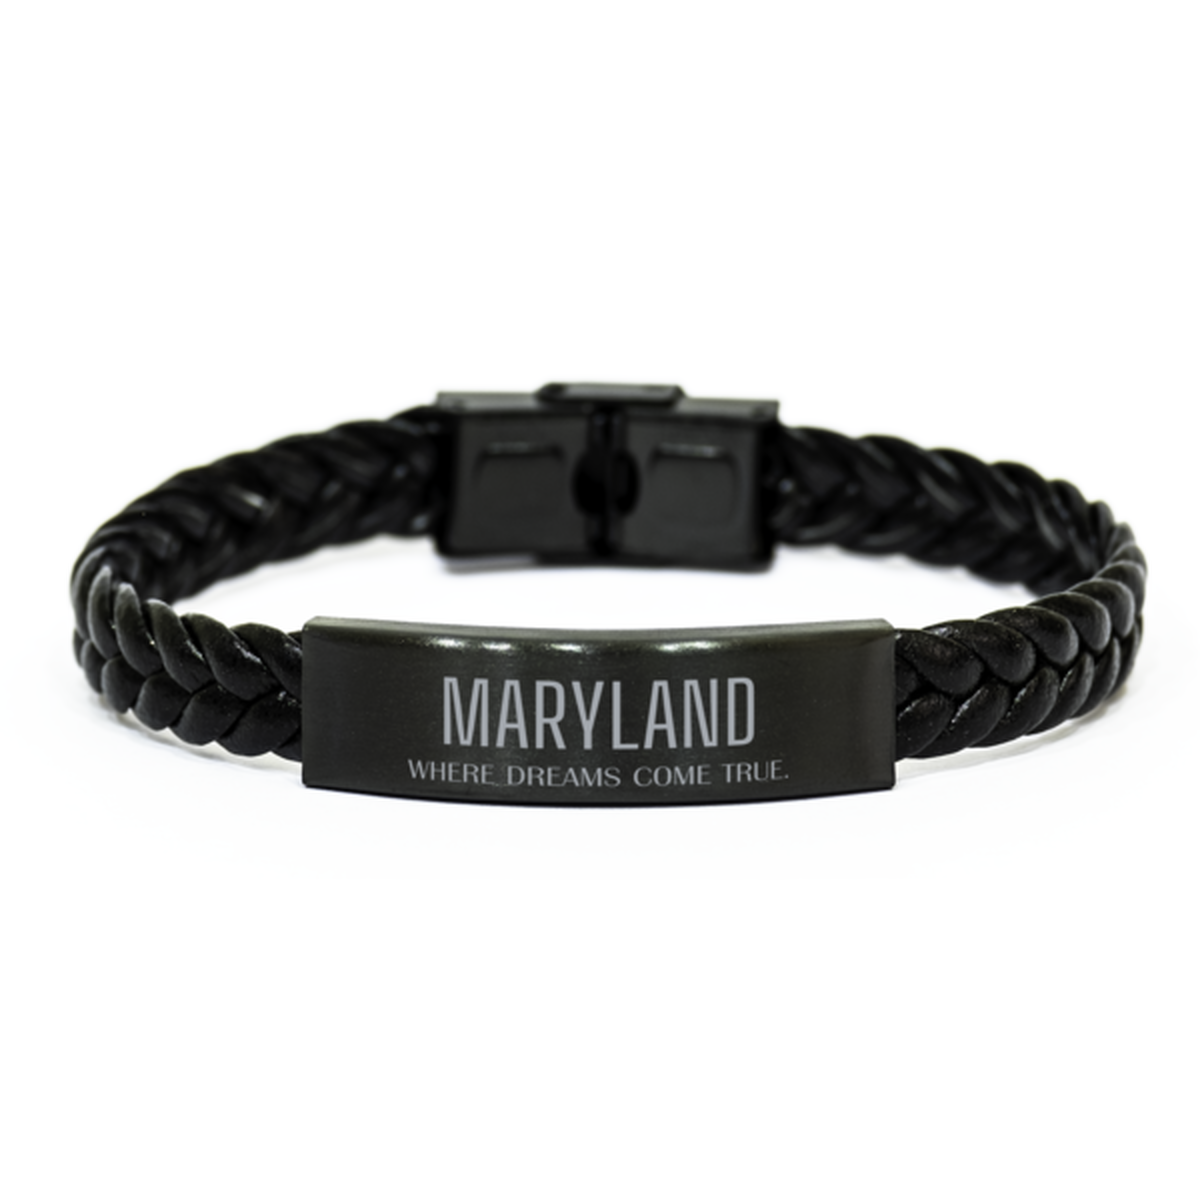 Love Maryland State Braided Leather Bracelet, Maryland Where dreams come true, Birthday Inspirational Gifts For Maryland Men, Women, Friends